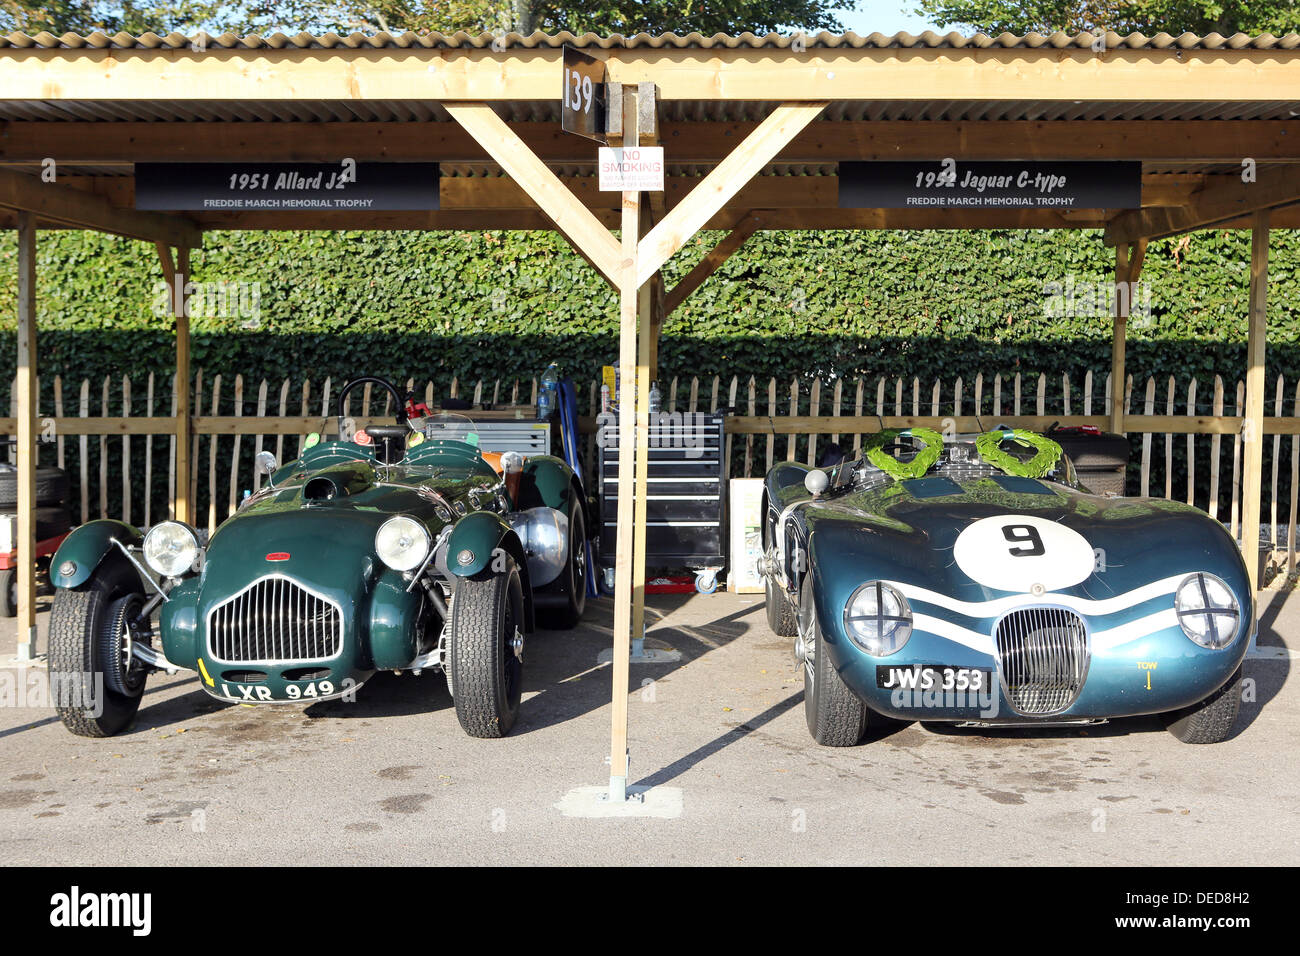 Chichester, UK . 15th Sep, 2013. Goodwood Revival 2013 at The Goodwood Motor Circuit - Photo shows 1951 Allard J2 and a 1952 Jaguar C-type © Oliver Dixon/Alamy Live News Stock Photo